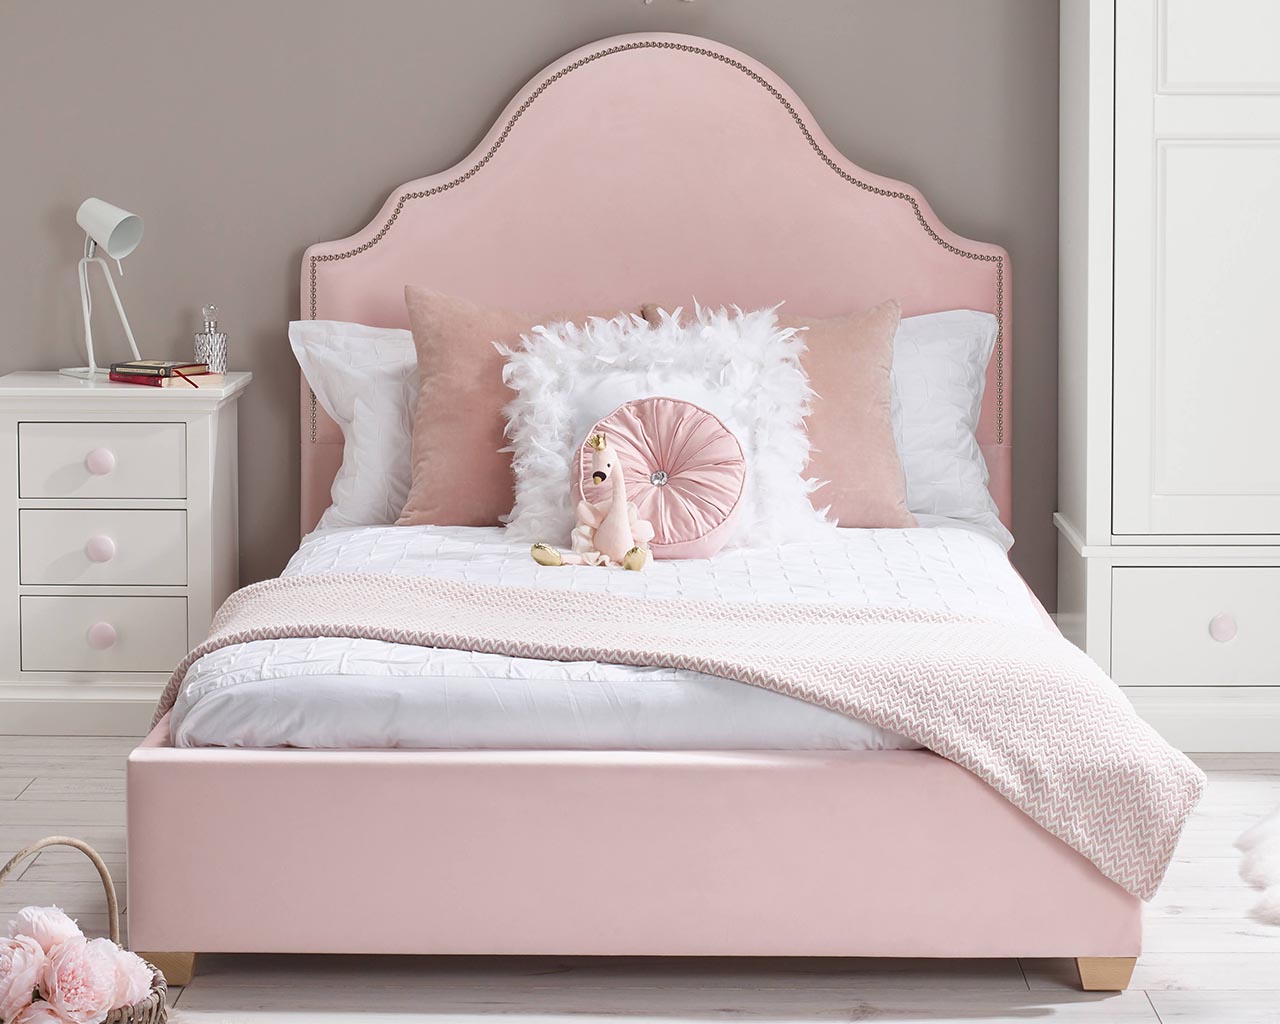 Bella small double bed in pink